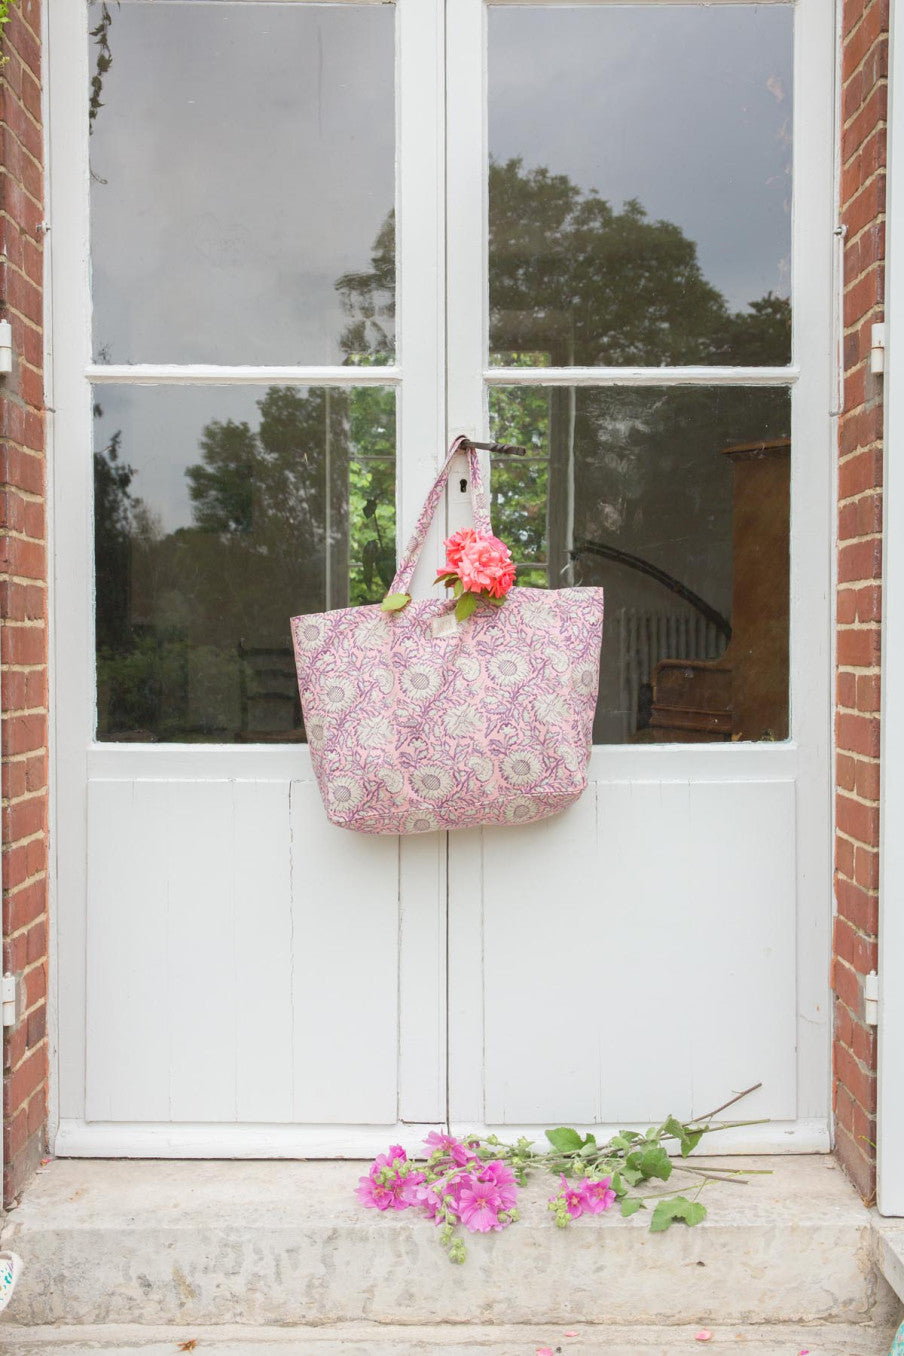 Large Tote Bag Beverly - Pink Daisy Garden